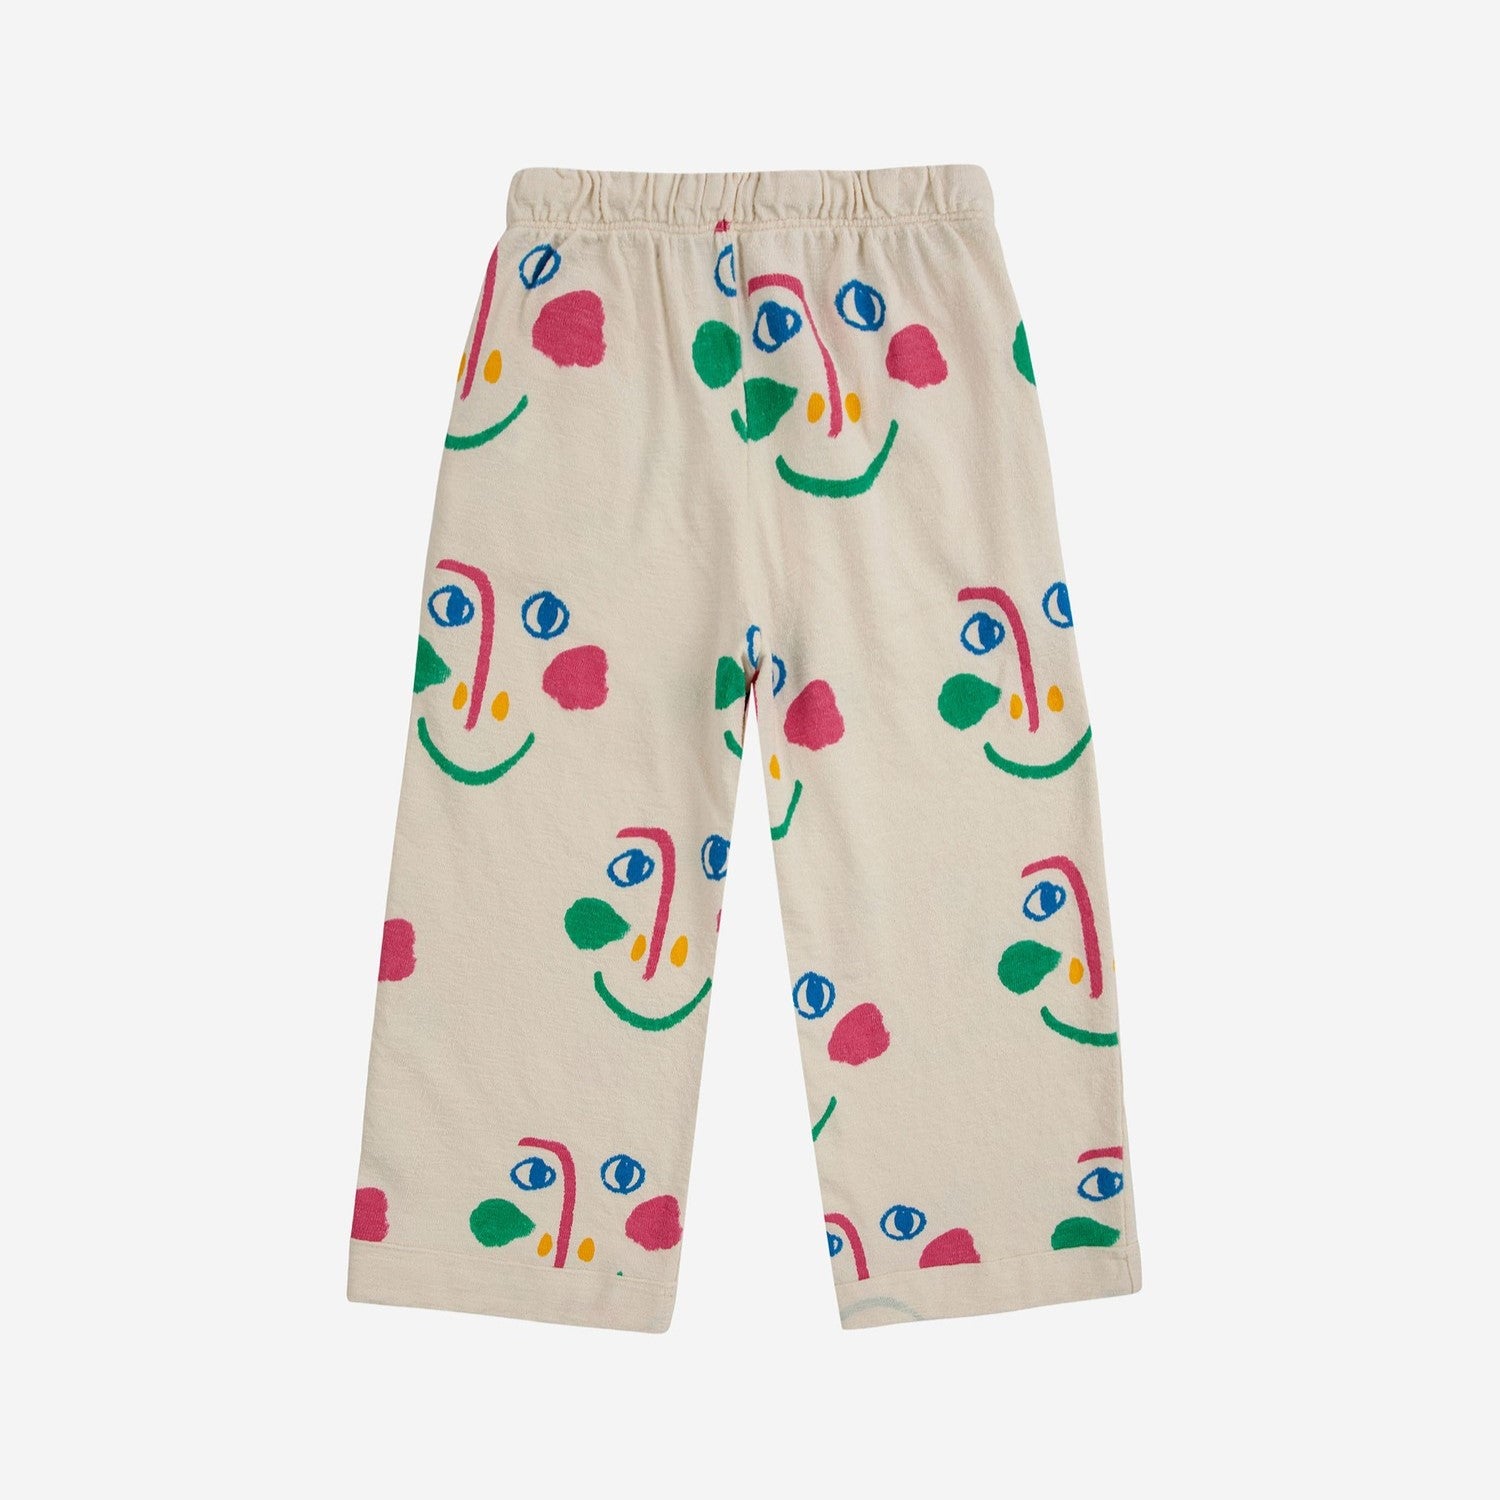 BOBO CHOSES Smiling Mask All Over Jogging Pants ALWAYS SHOW